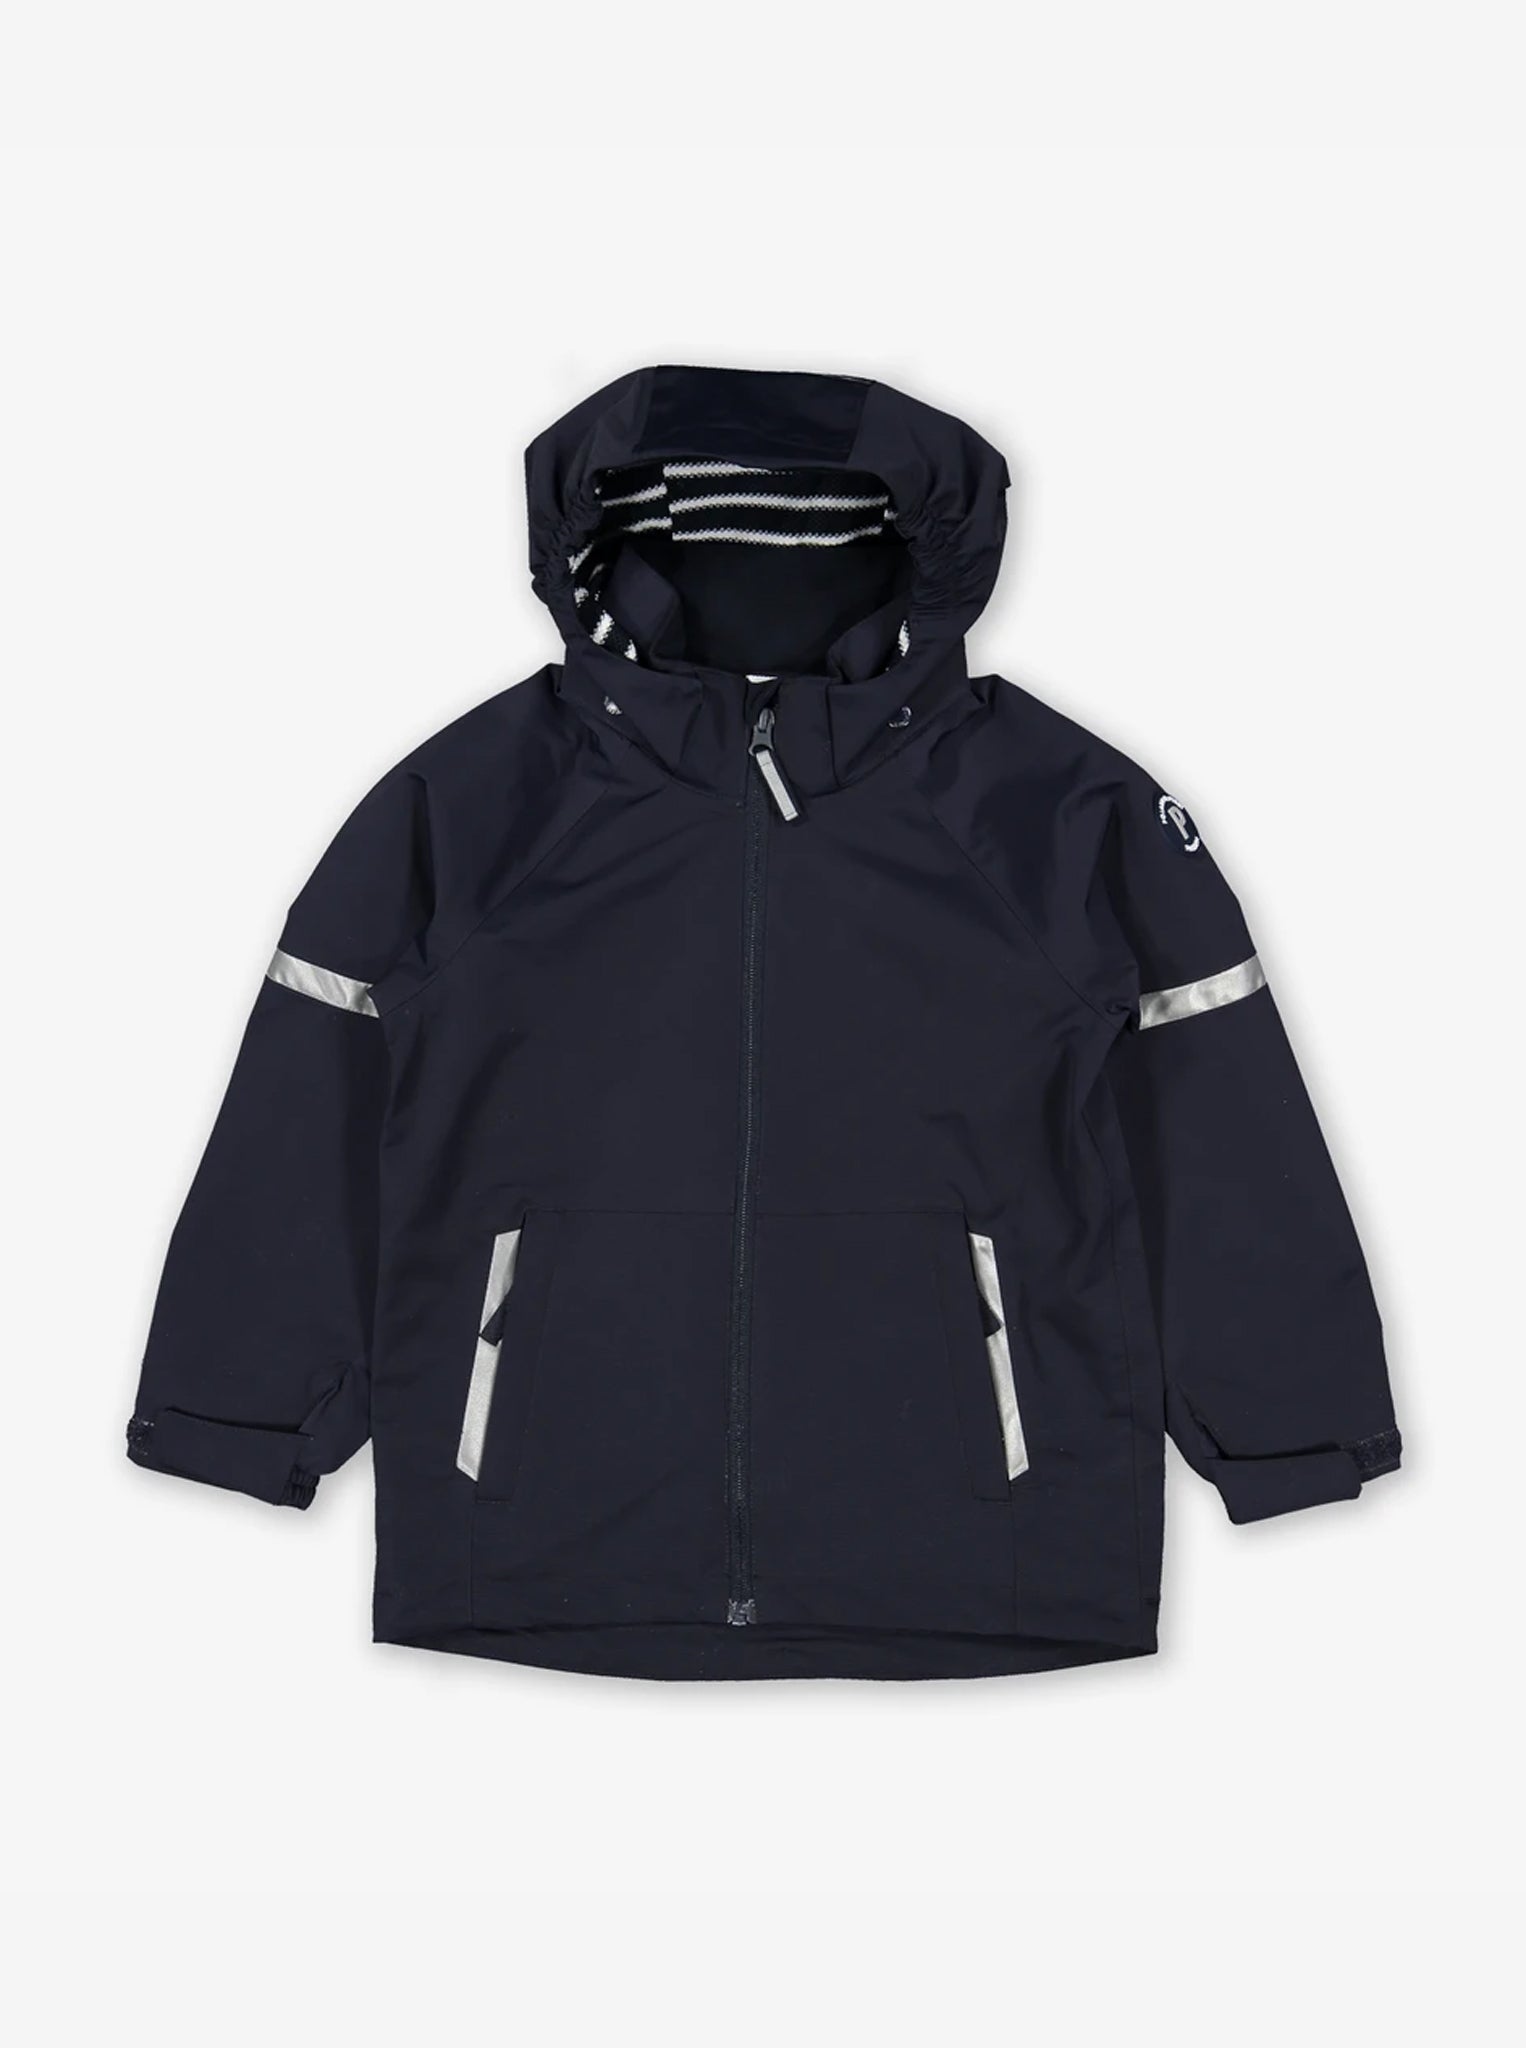 Kids waterproof jacket in navy, includes a detachable hood and adjustable cuffs, made of lightweight shell fabric. 